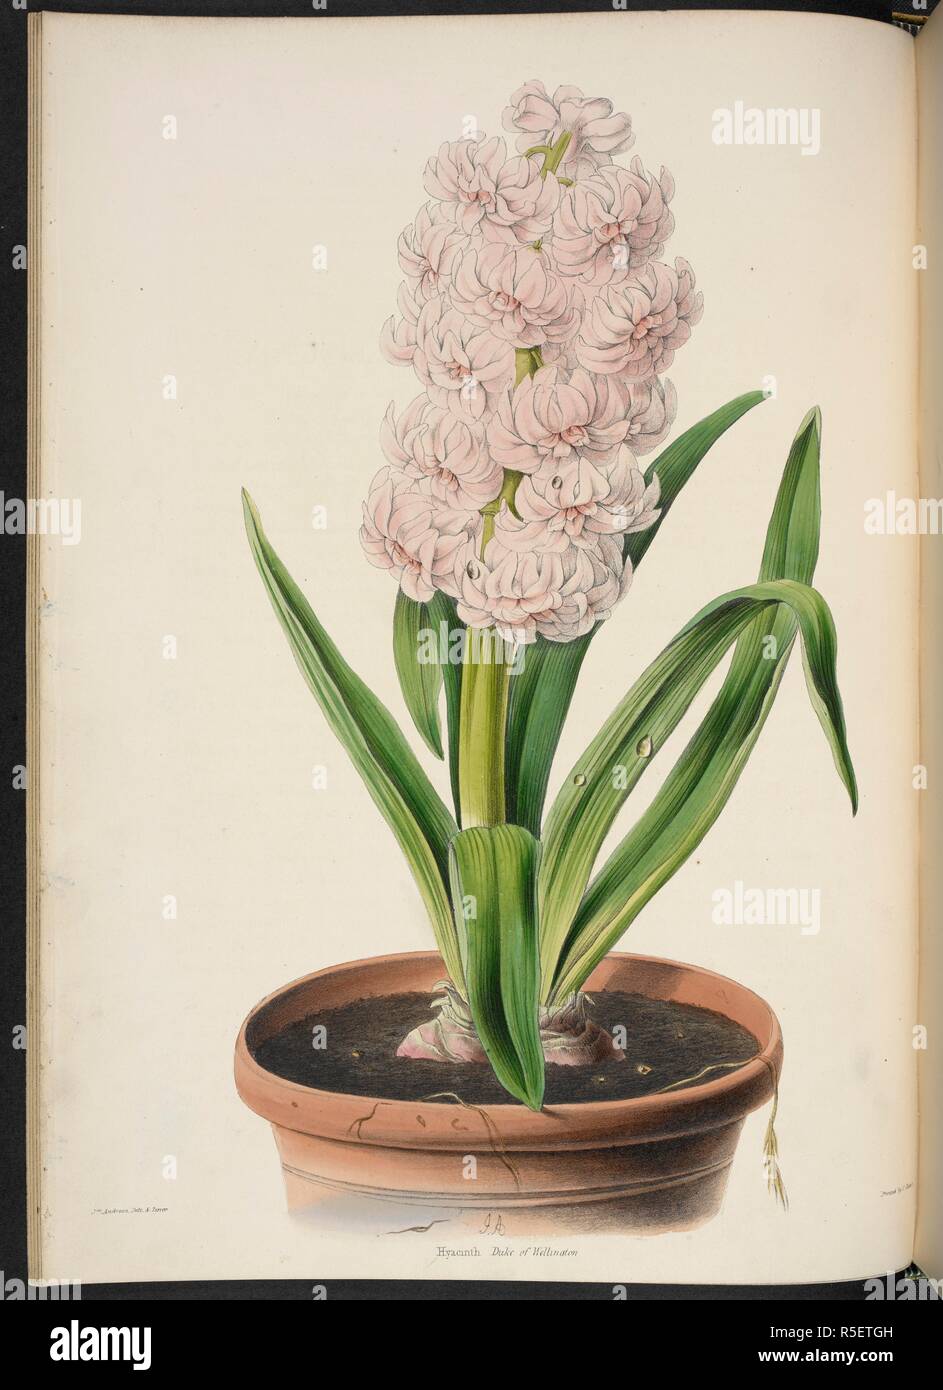 Hyacinth: Duke of Wellington. The Illustrated Bouquet, consisting of figures, with descriptions of new flowers. London, 1857-64. Source: 1823.c.13 plate 7. Author: Henderson, Edward George. Andrews, Jas. Stock Photo